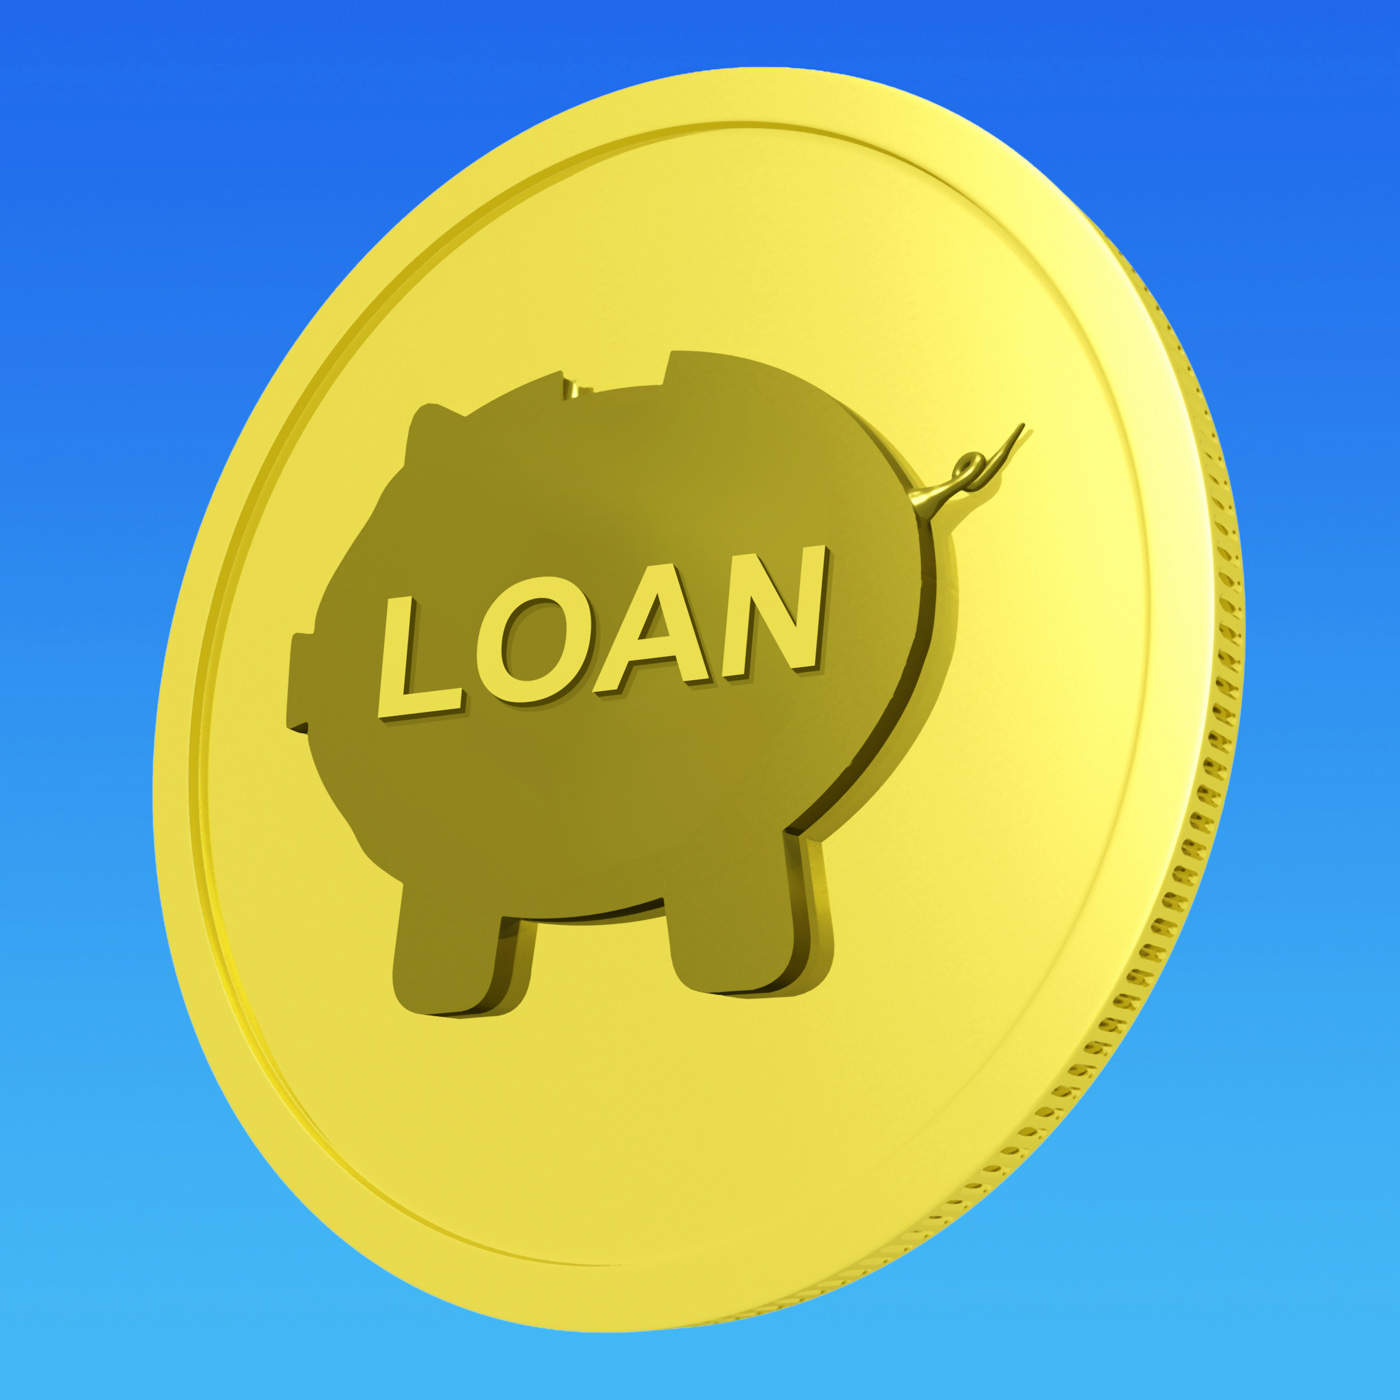 Loan coin means credit borrowing or investment photo